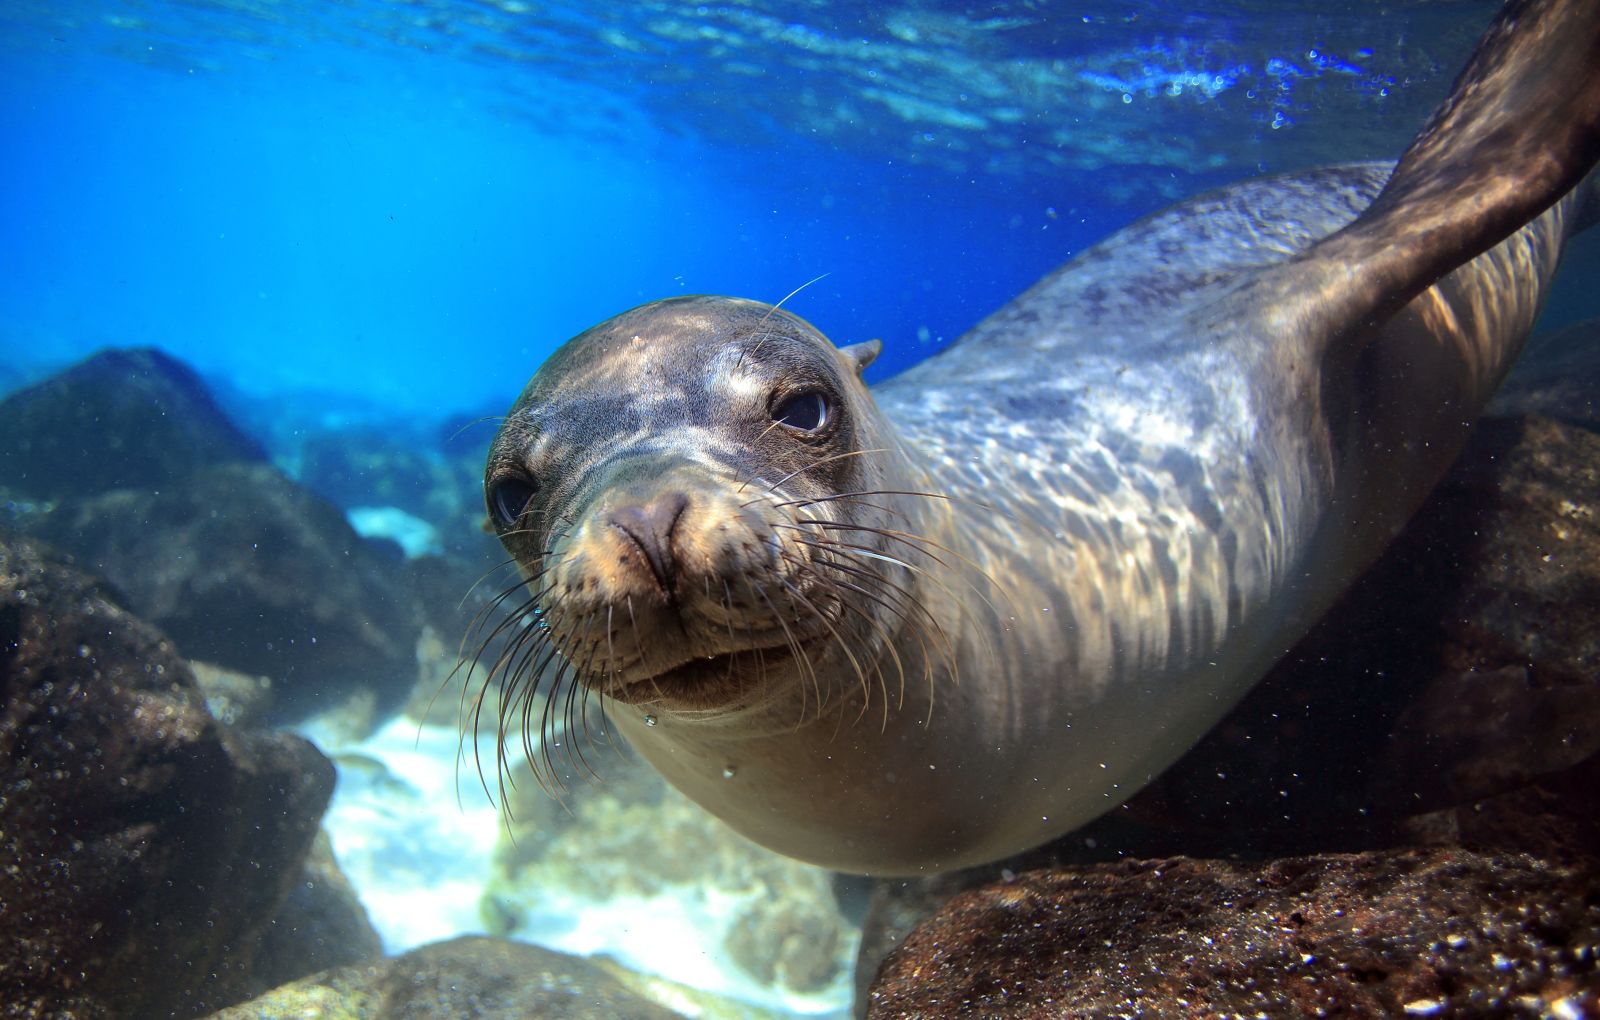 A sea lion swimming underwater with a snorkeller in the Galapagos Islands